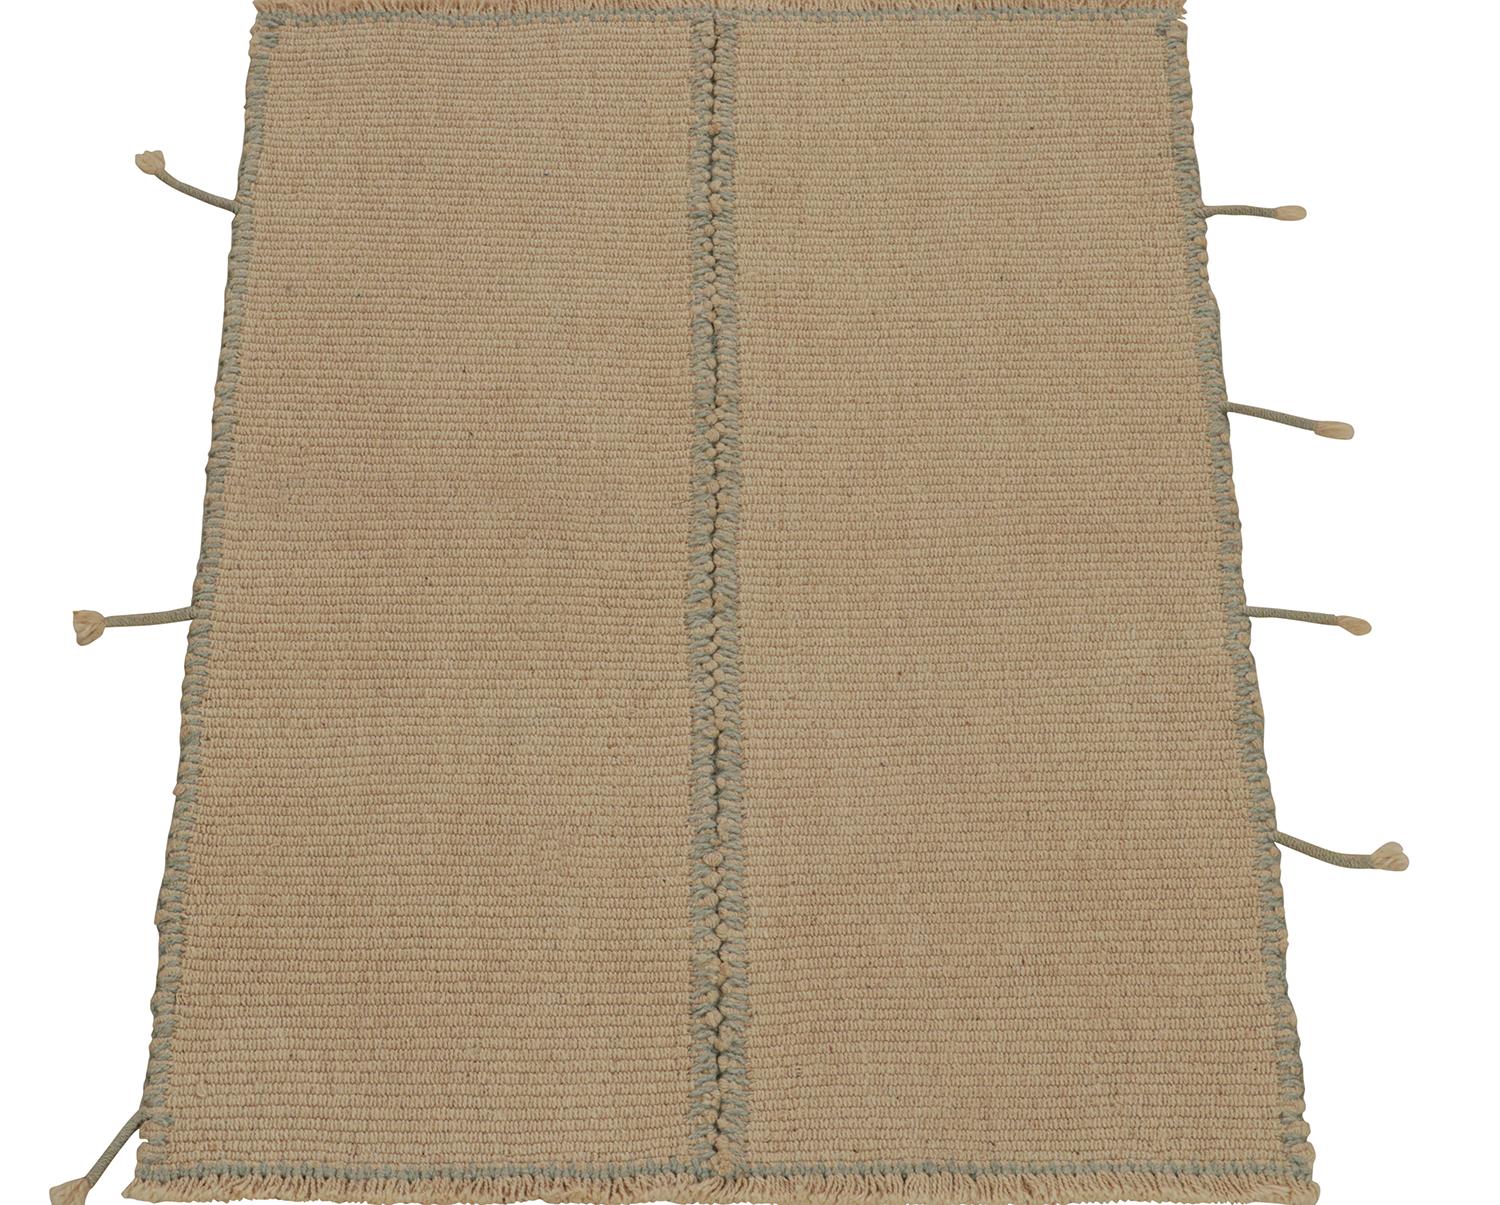 Afghan Rug & Kilim’s Contemporary Kilim in Beige-Brown with Light Blue Accents For Sale